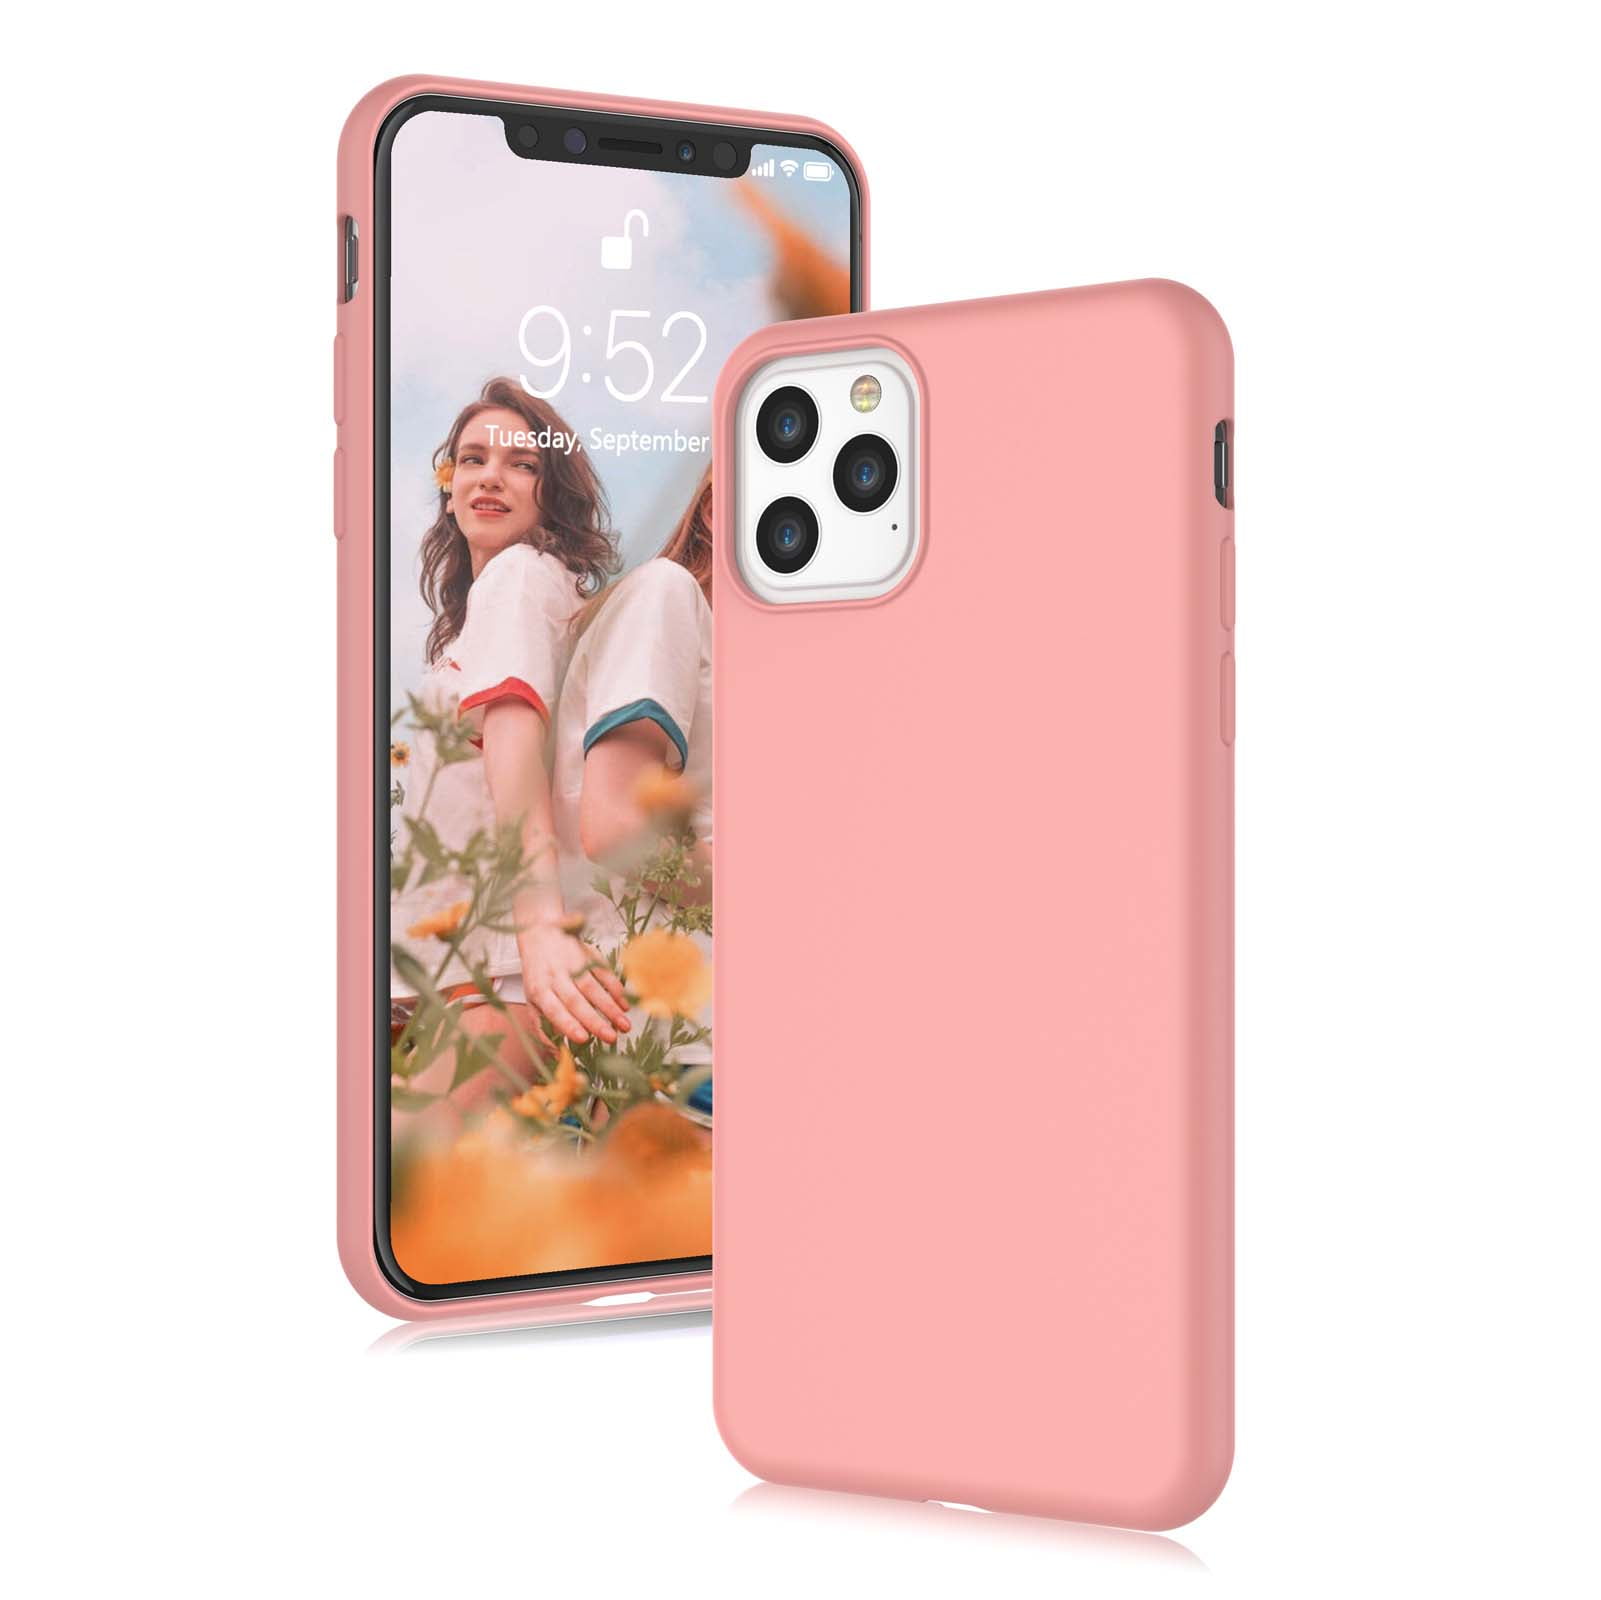 Cell Phone Cases For 6 5 Iphone 11 Pro Max Njjex Liquid Silicone Gel Rubber Shockproof Case Ultra Thin Fit Iphone 11 Pro Max Case Slim Matte Surface Cover For Apple Iphone 11